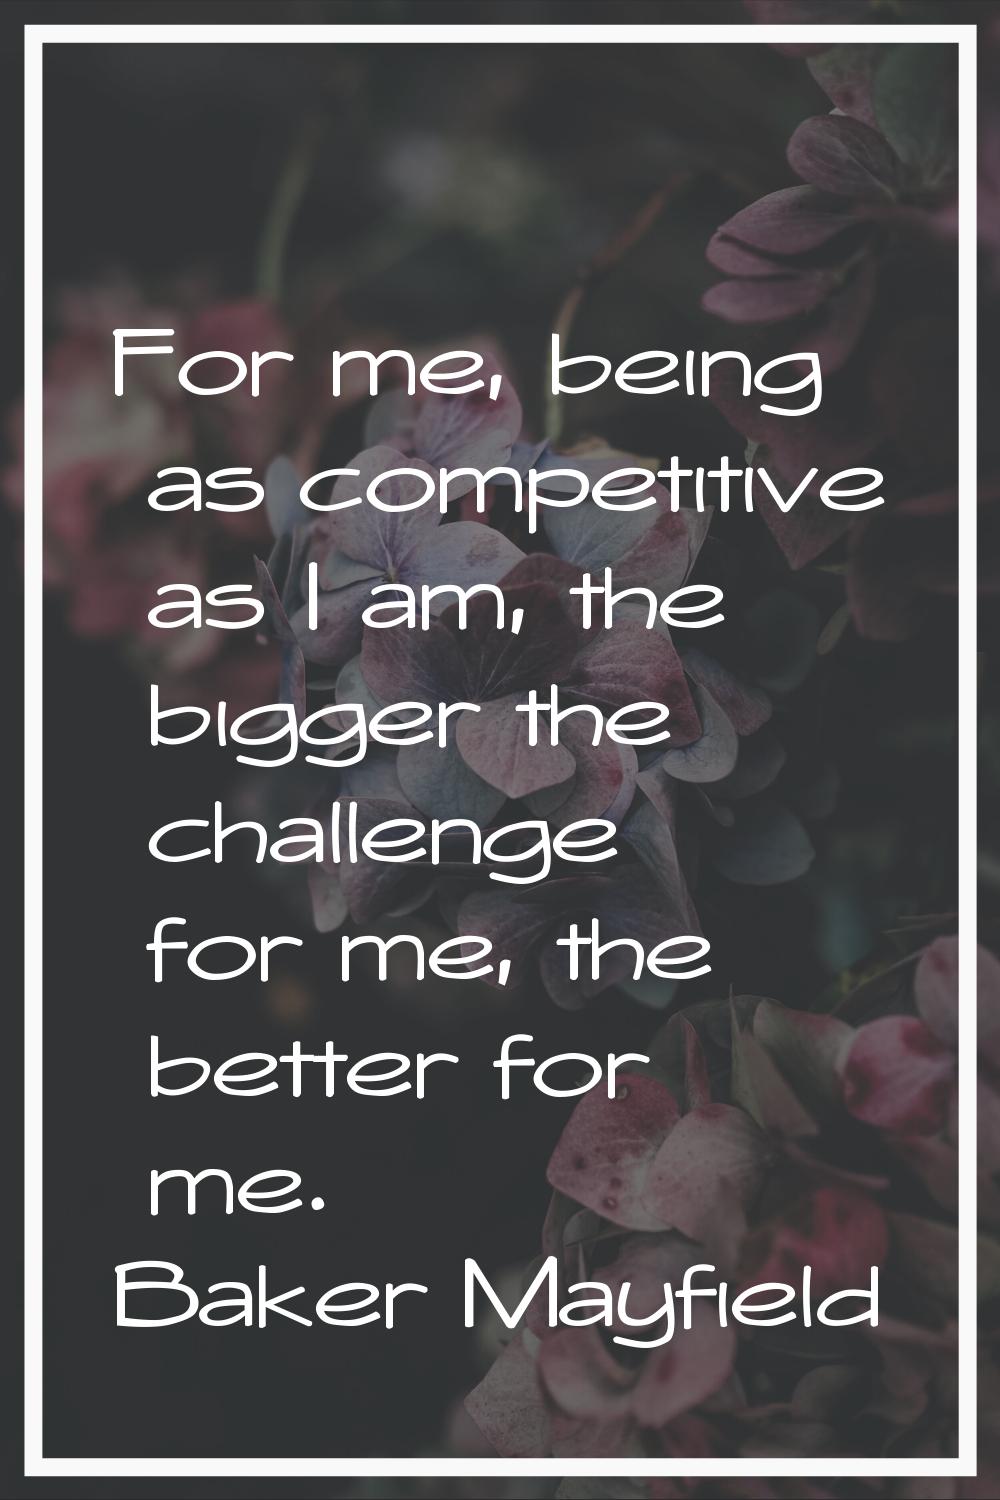 For me, being as competitive as I am, the bigger the challenge for me, the better for me.